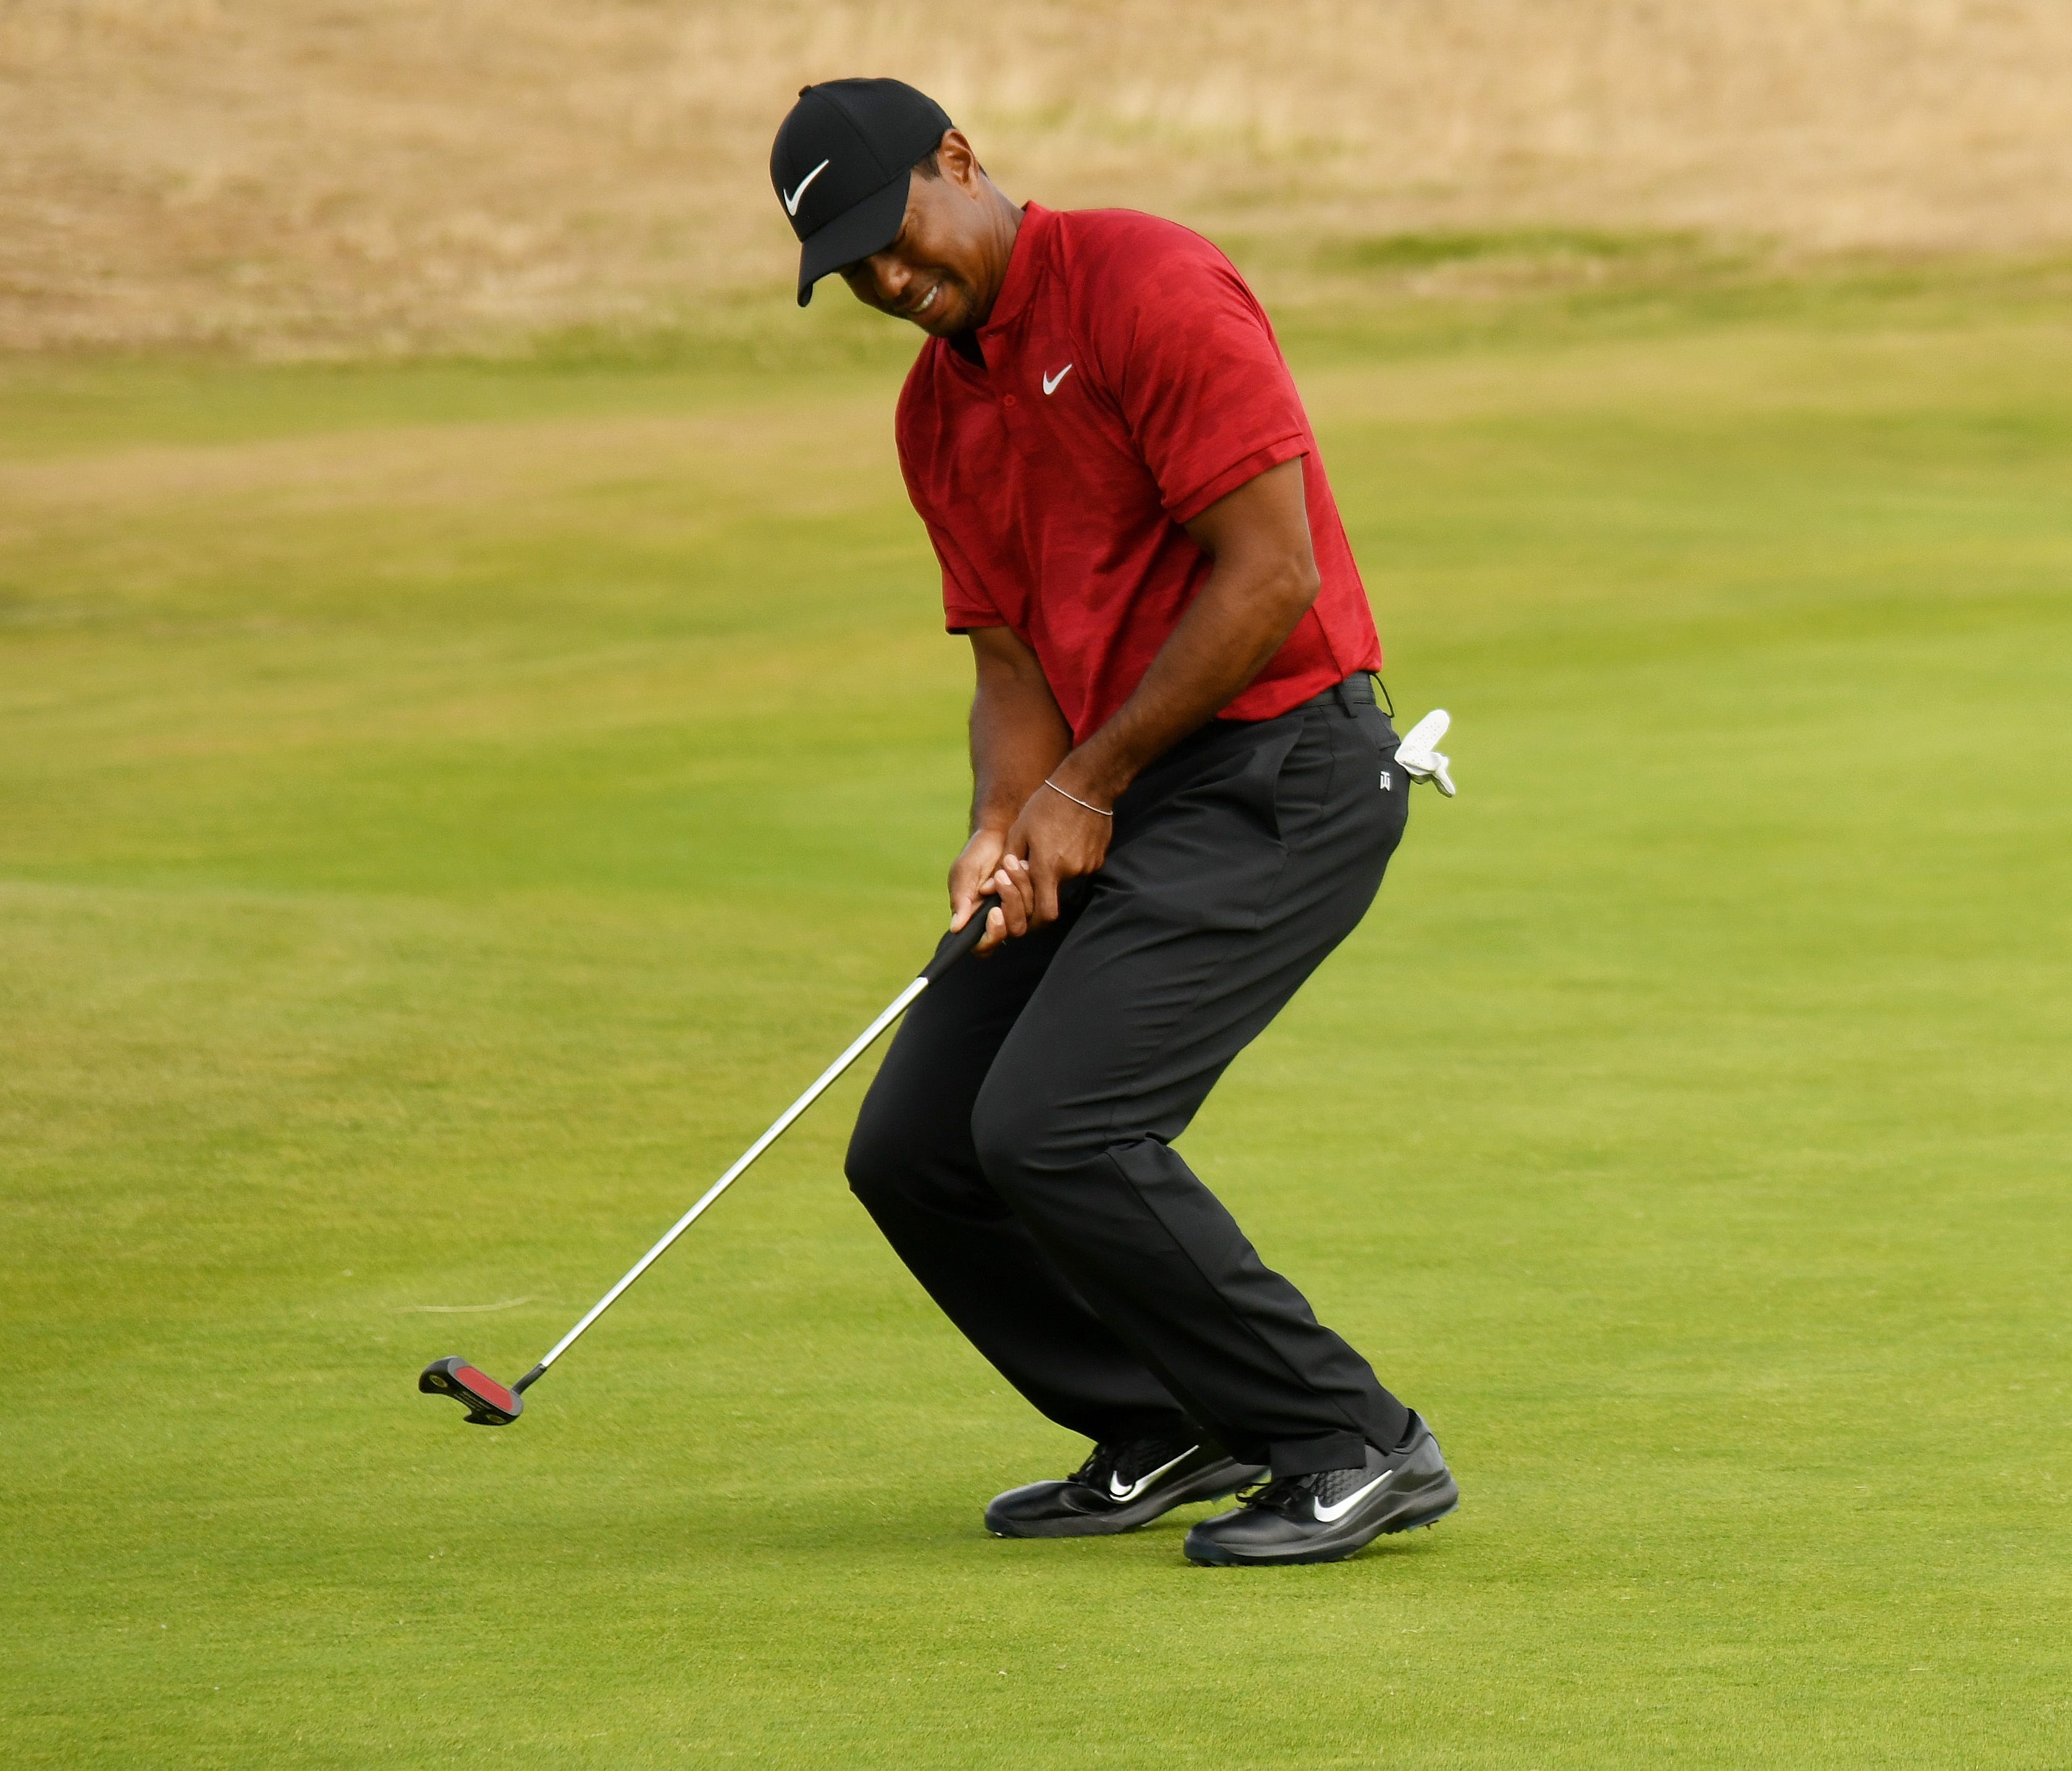 Tiger Woods reacts to a putt for birdie on the first green during the final round of the 147th Open Championship at Carnoustie Golf Club.